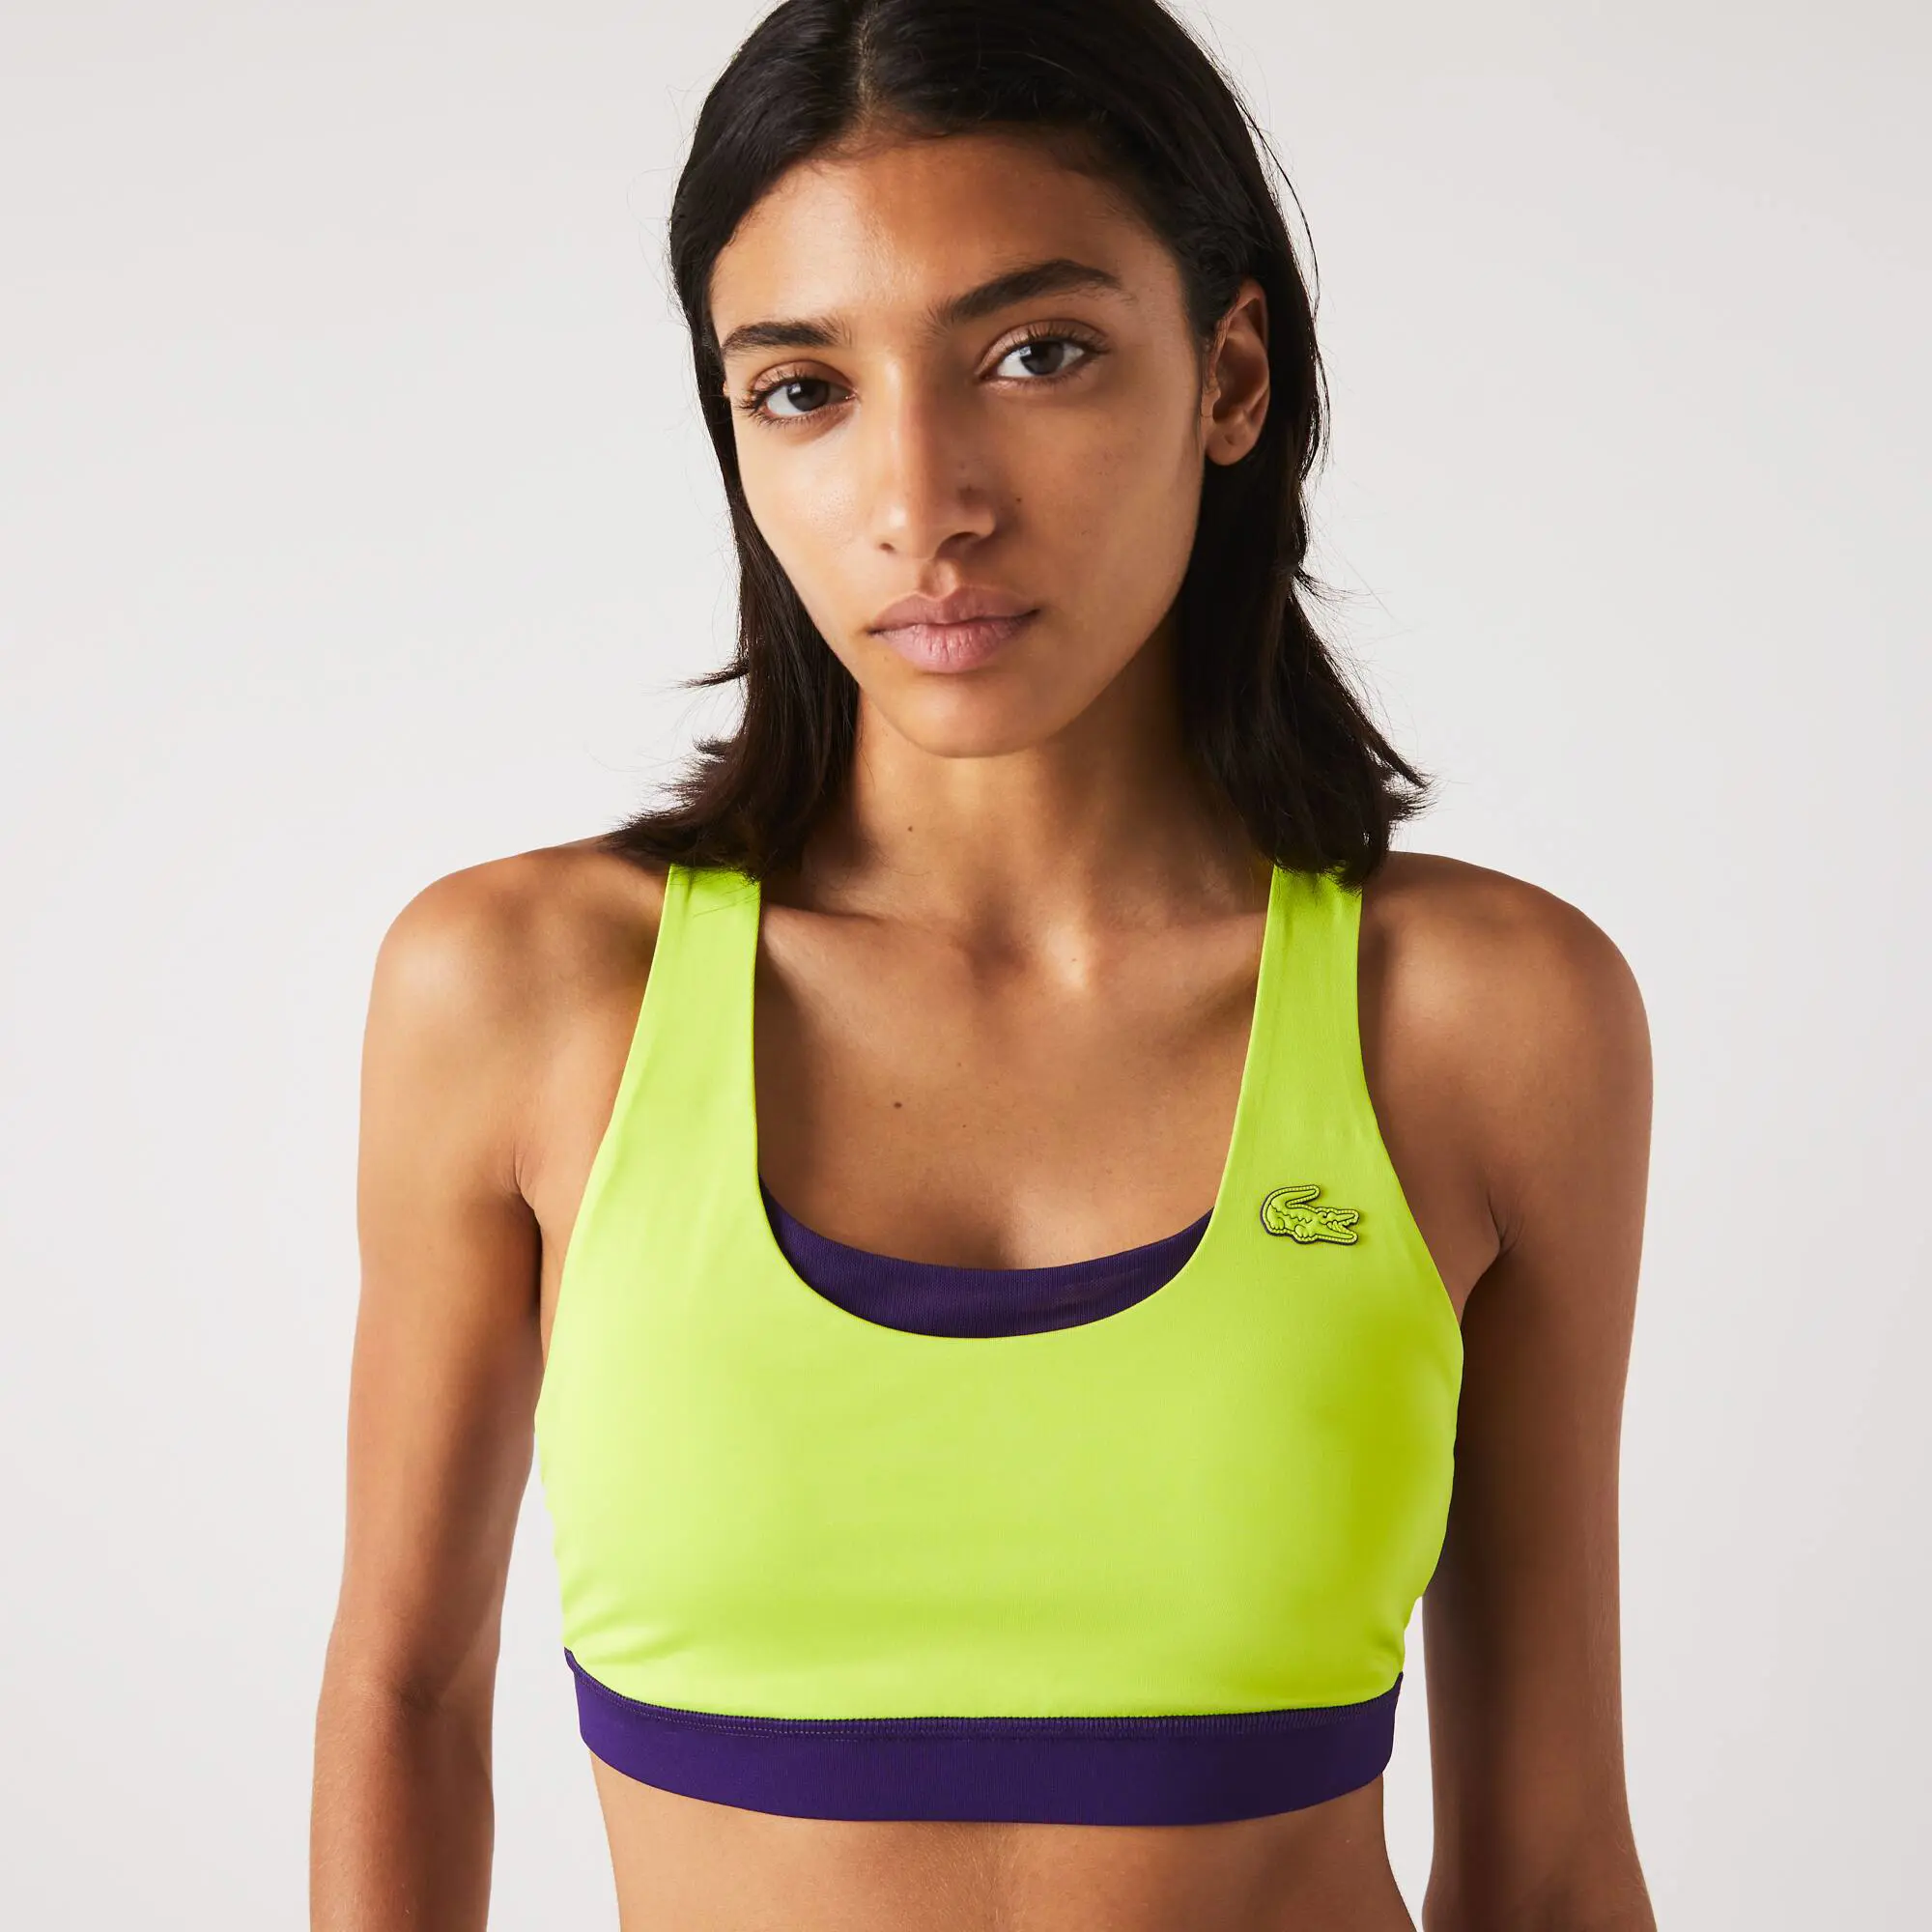 Lacoste Women's SPORT Colorblock Recycled Polyester Sports Bra. 1